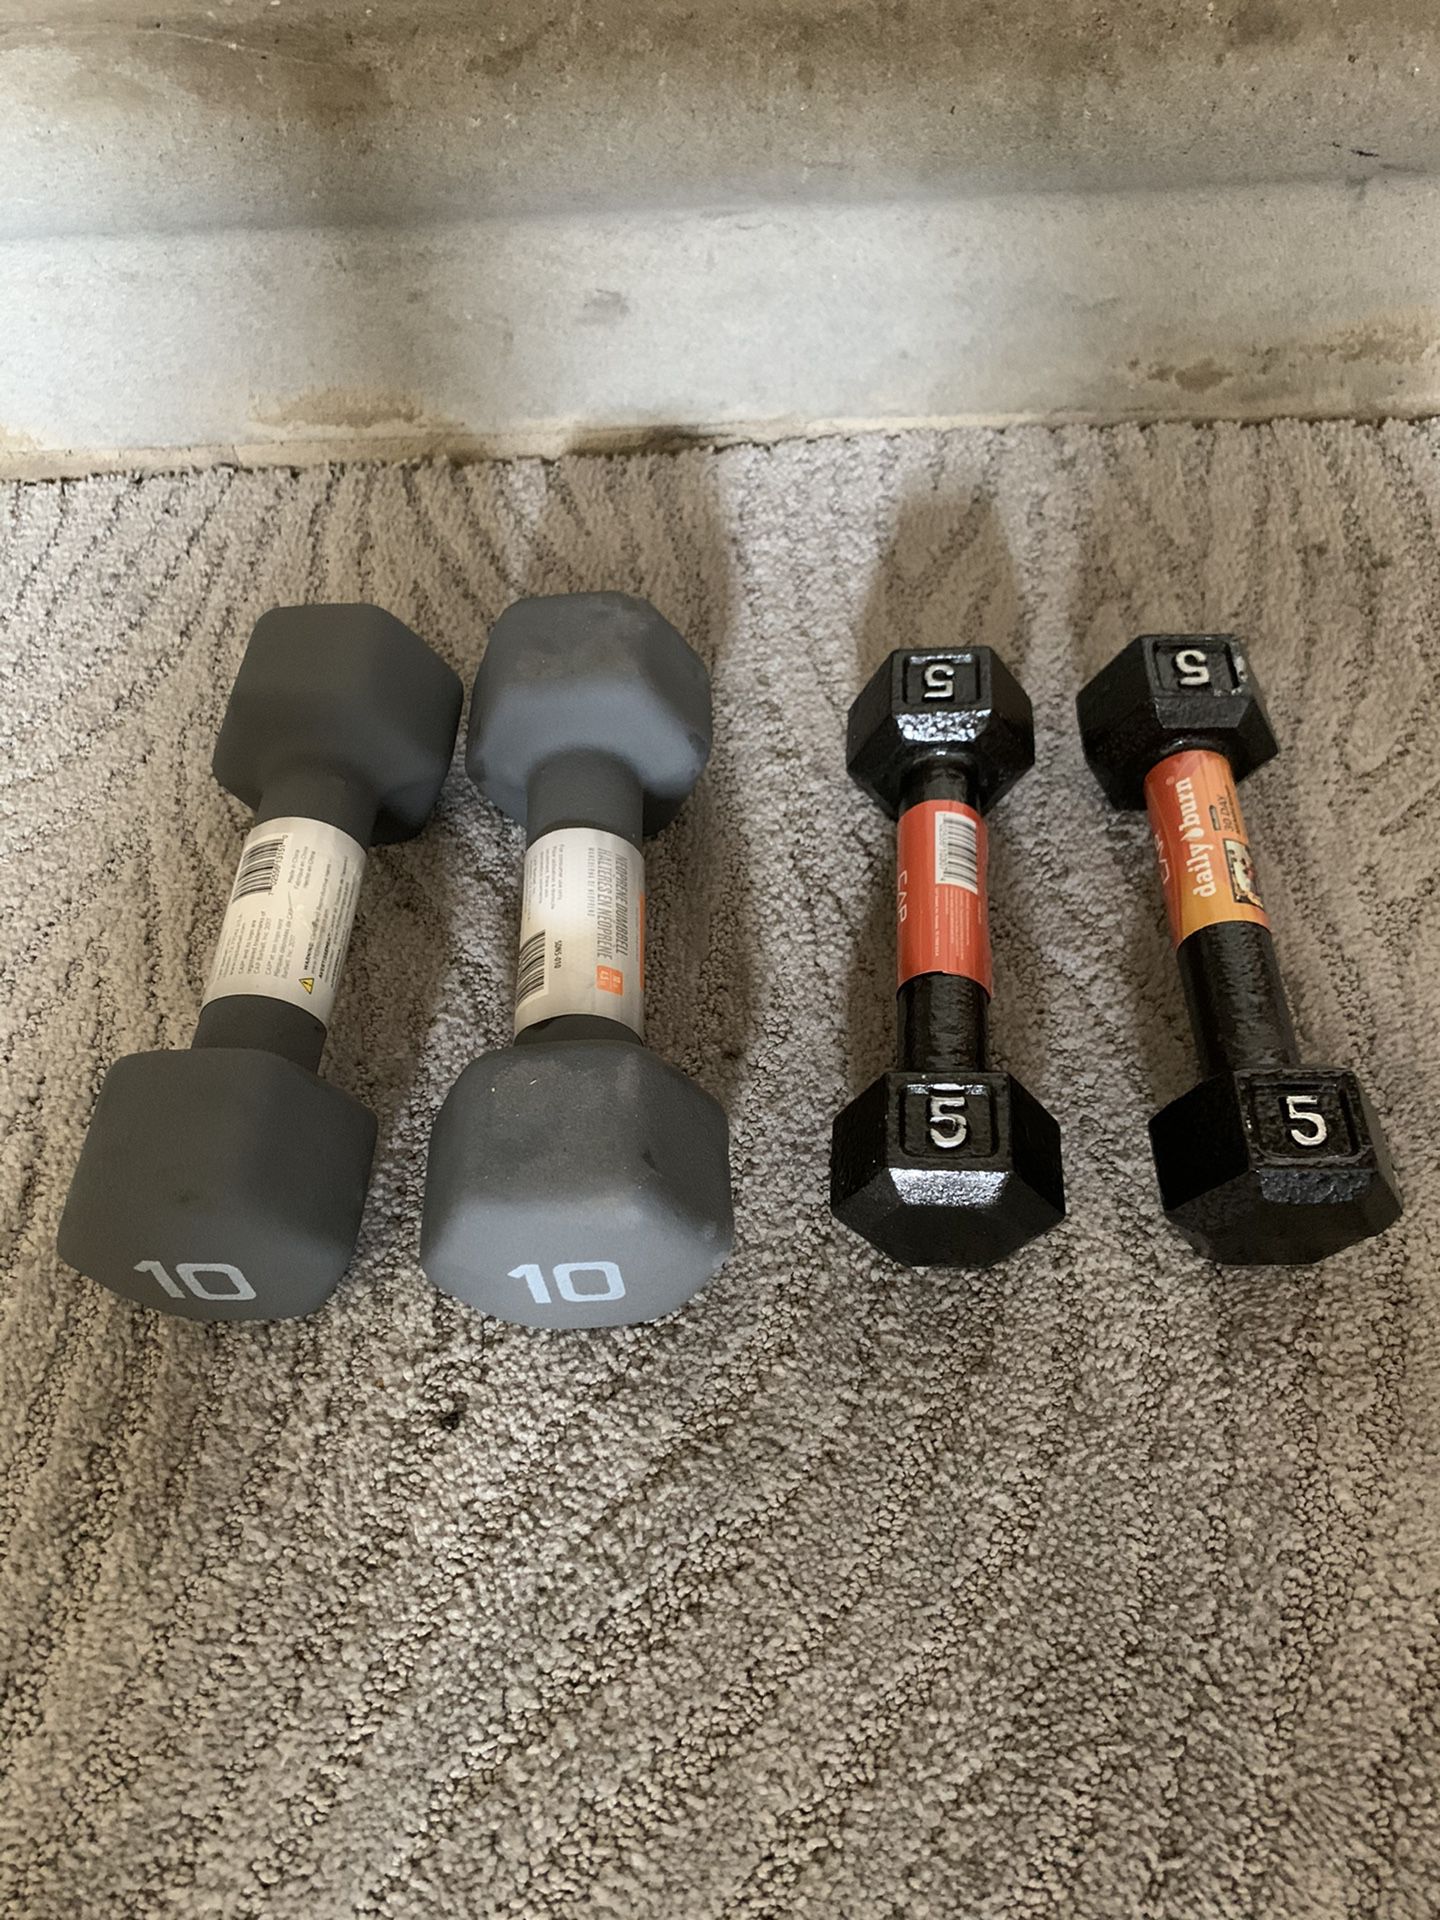 Two dumbbell sets 10 & 5 LBS